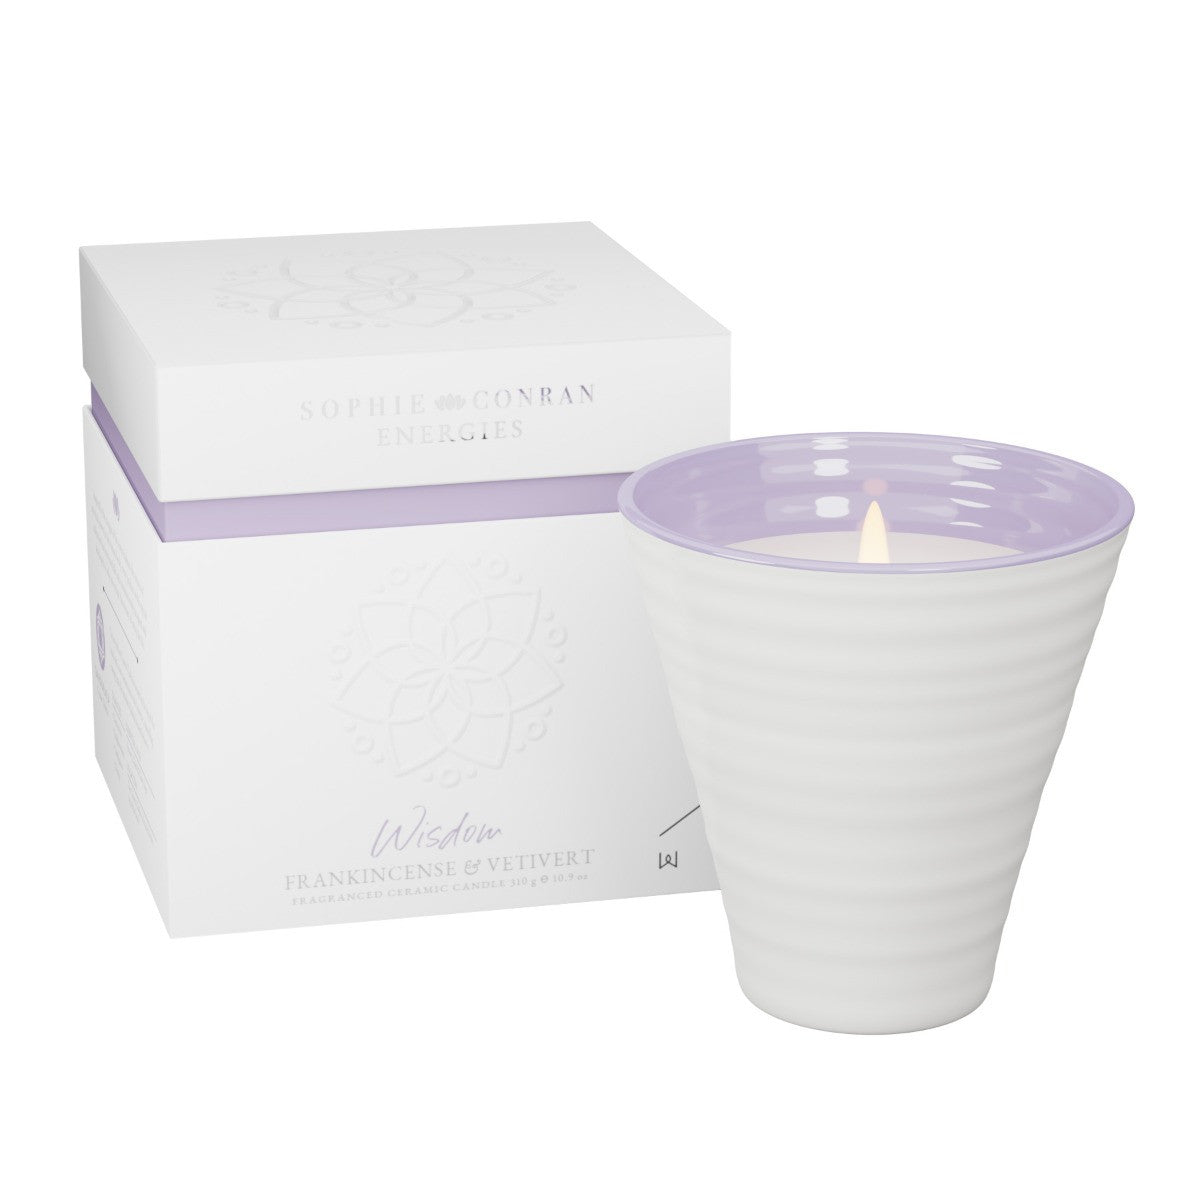 Sophie Conran Energies - Wisdom Candle by Wax Lyrical. Made in England.